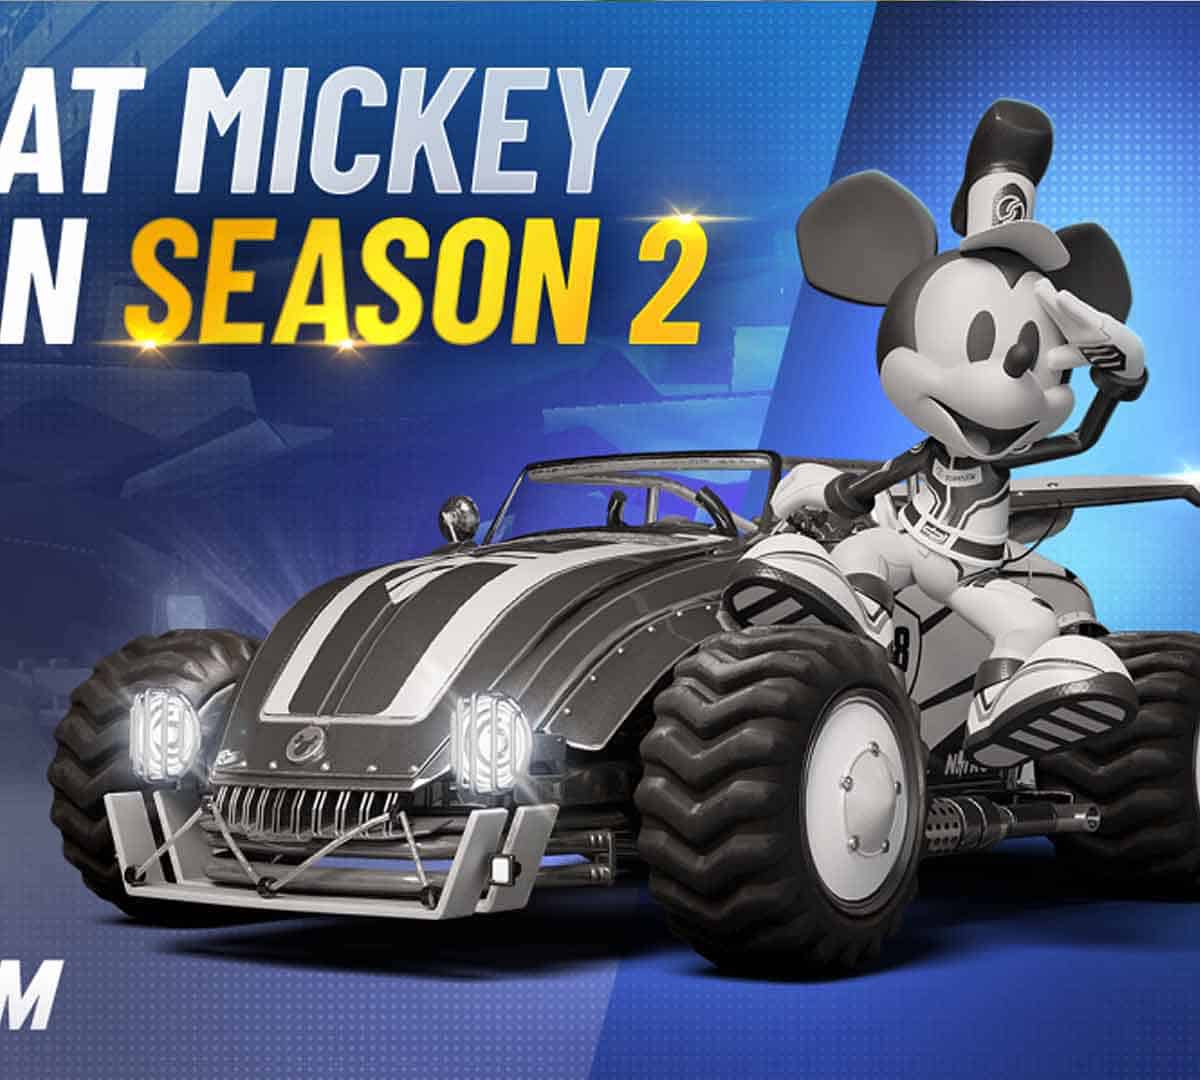 Disney Speedstorm's Season 2 - New Racers, Tracks, and Game Modes Revealed for High-Octane Fun! 19